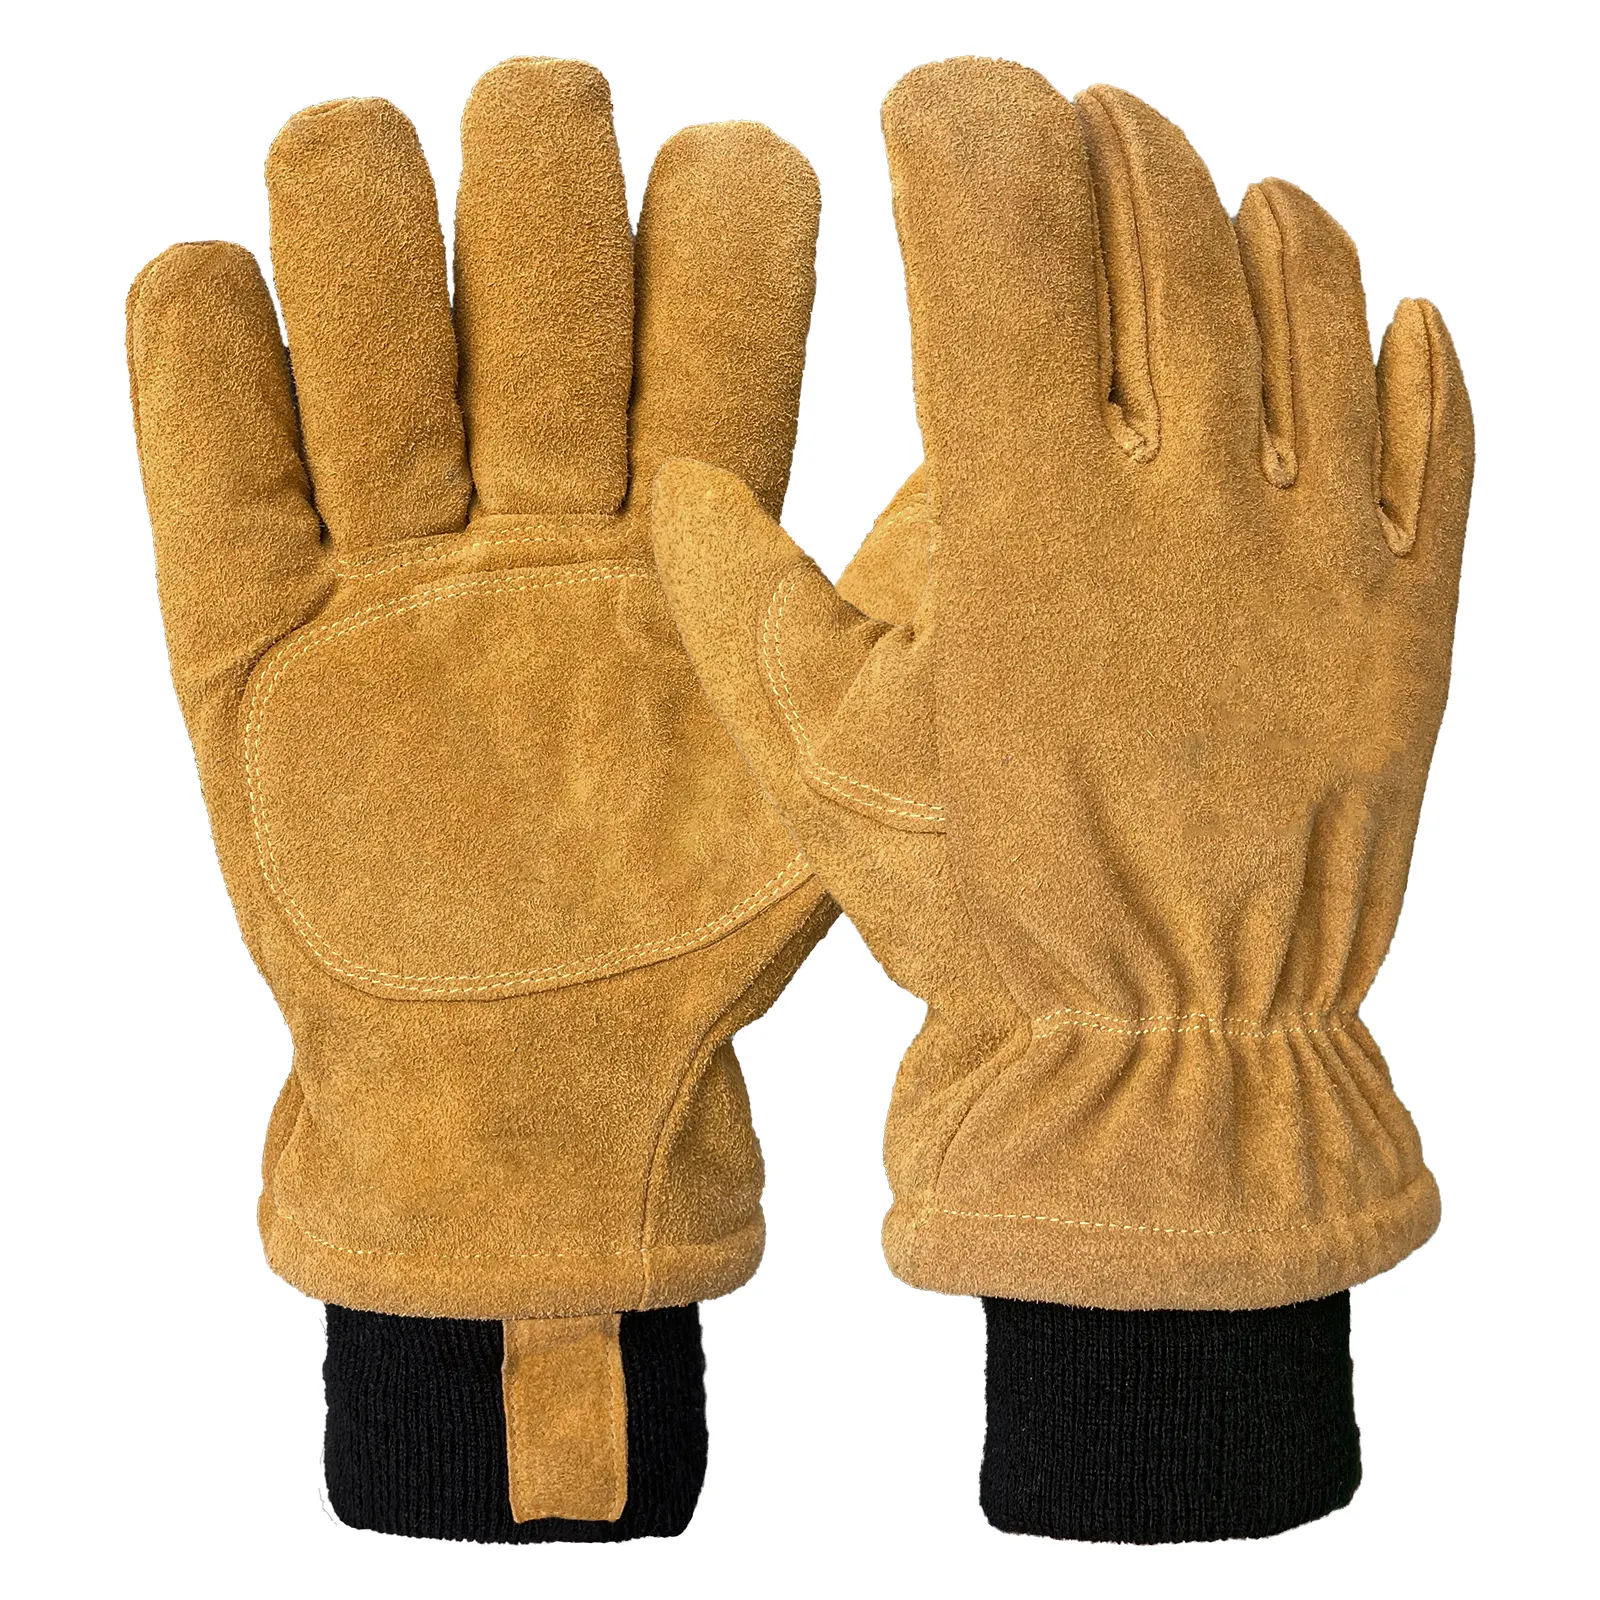 Wholesale Double Layers Cowhide Leather Fleece Lined Winter Work Gloves for Men with Elastic Cuff